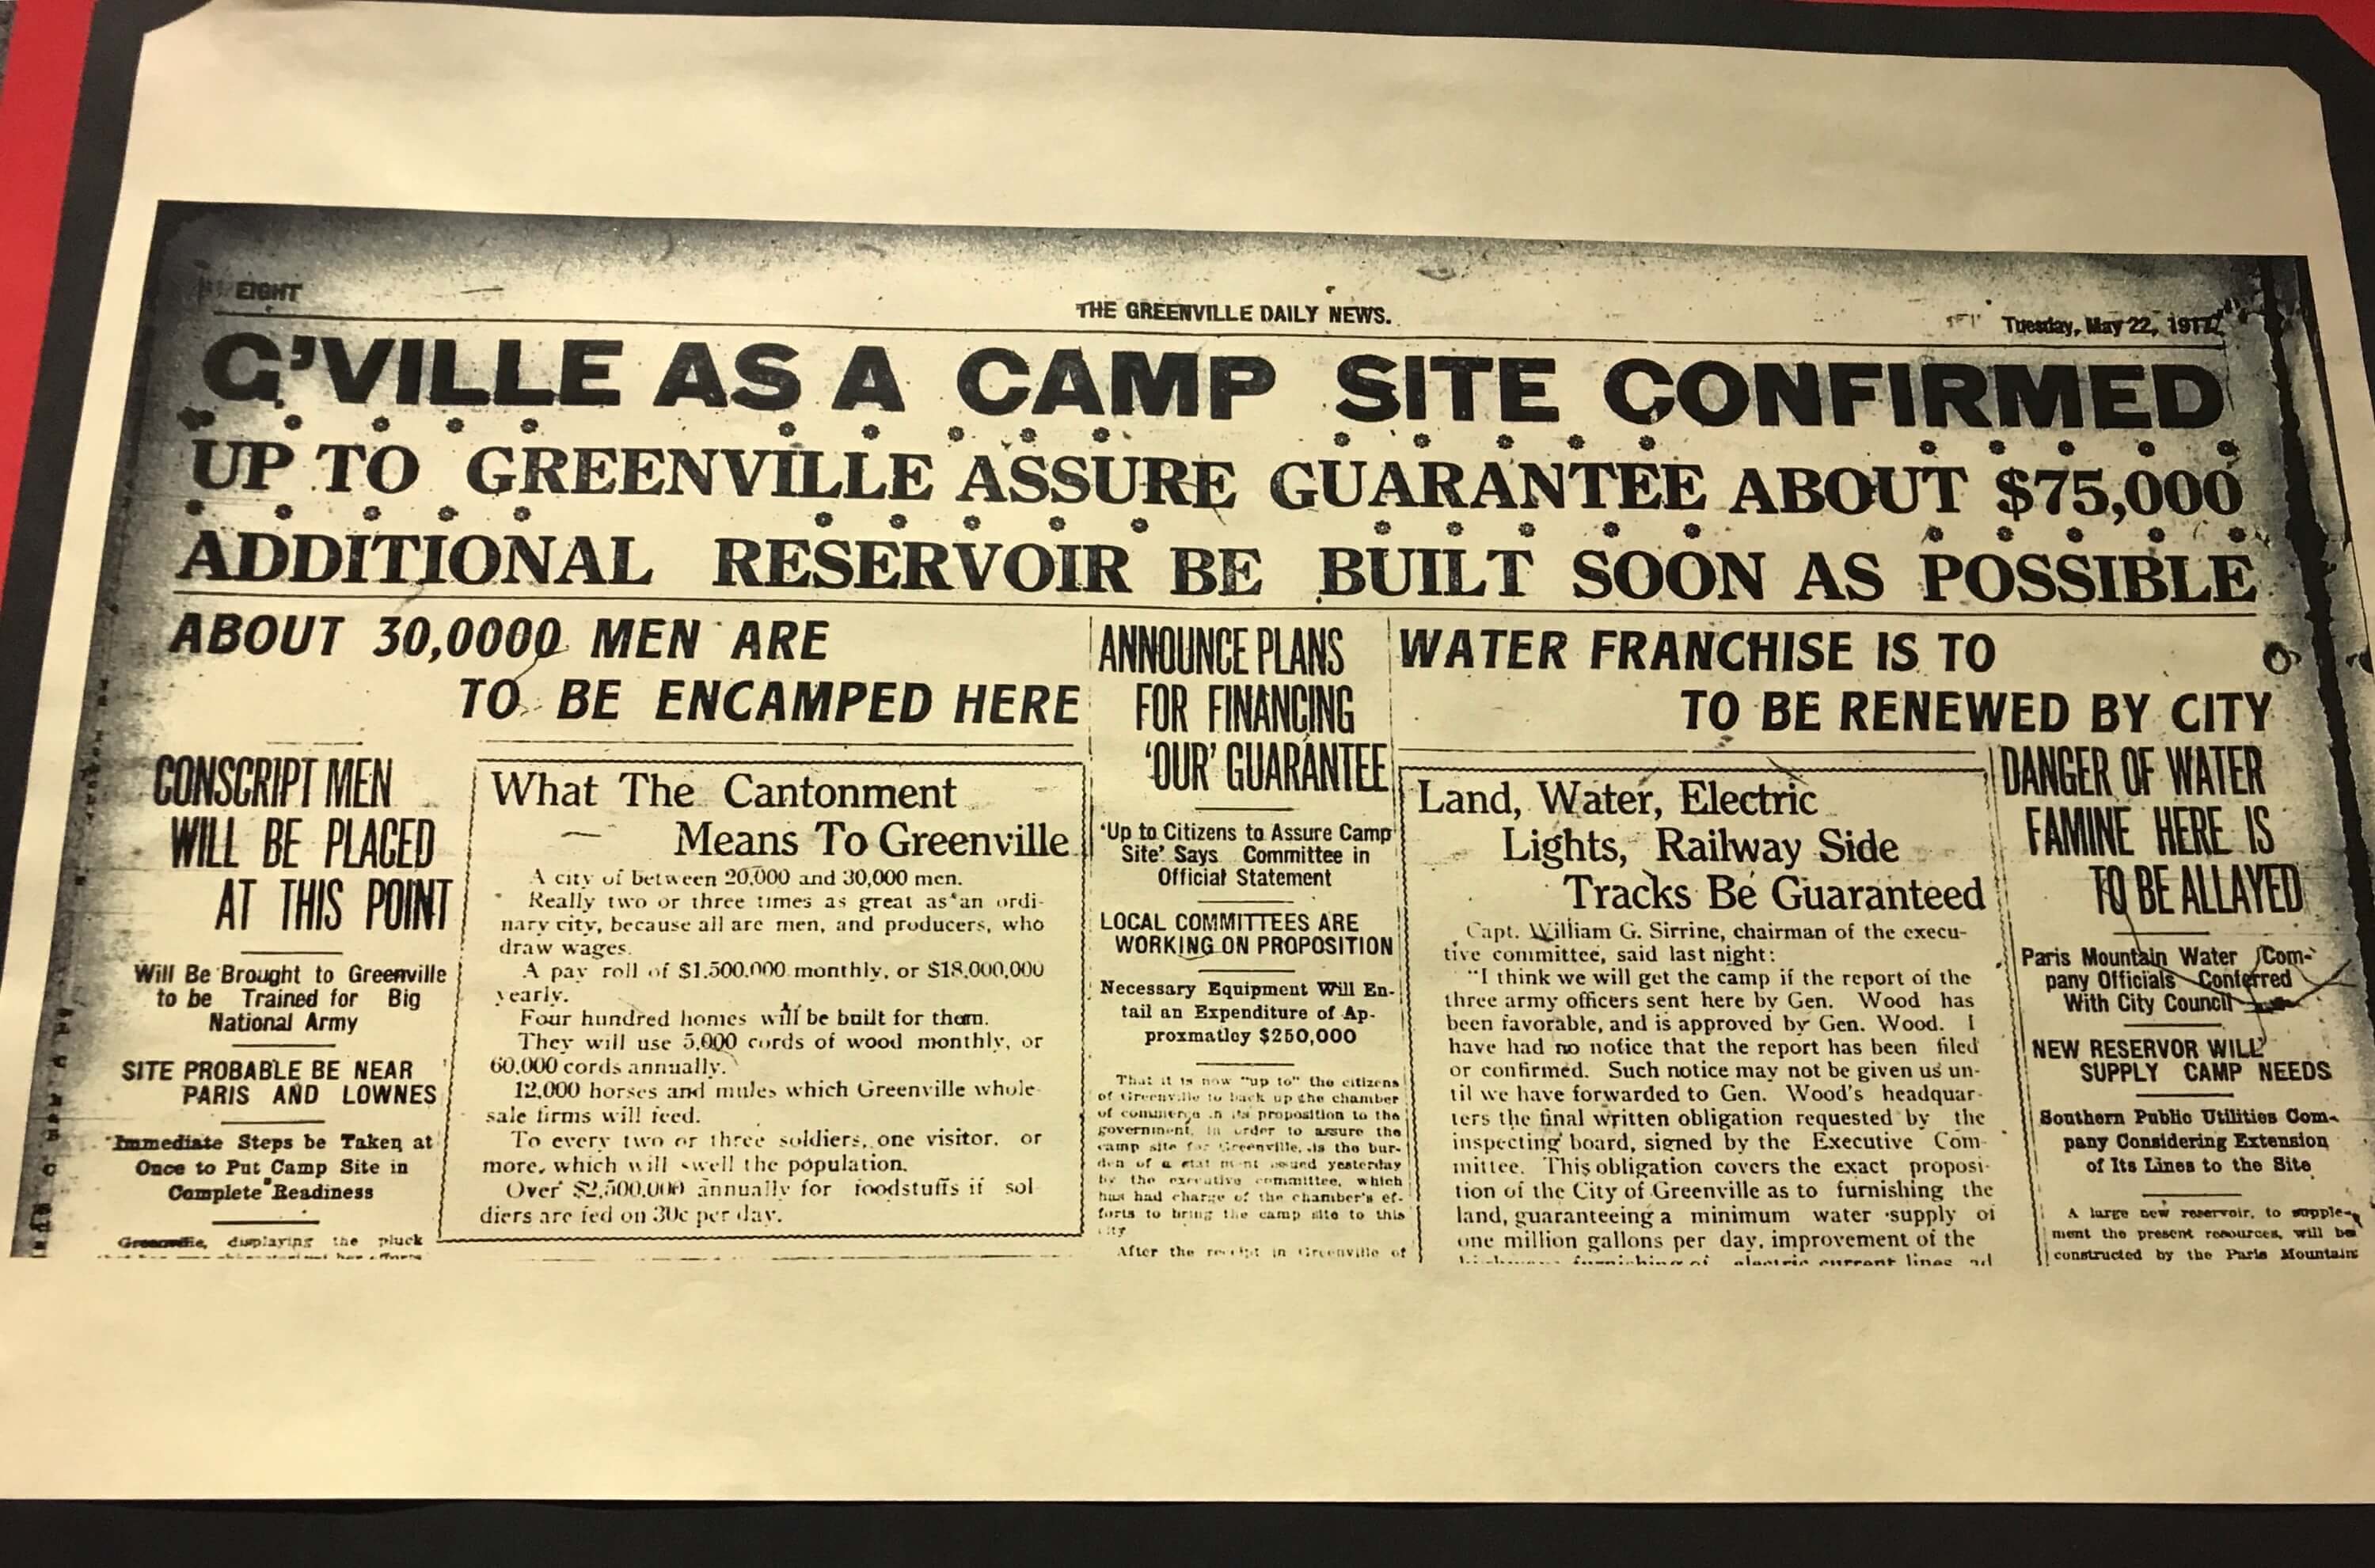 Greenville as camp site in news